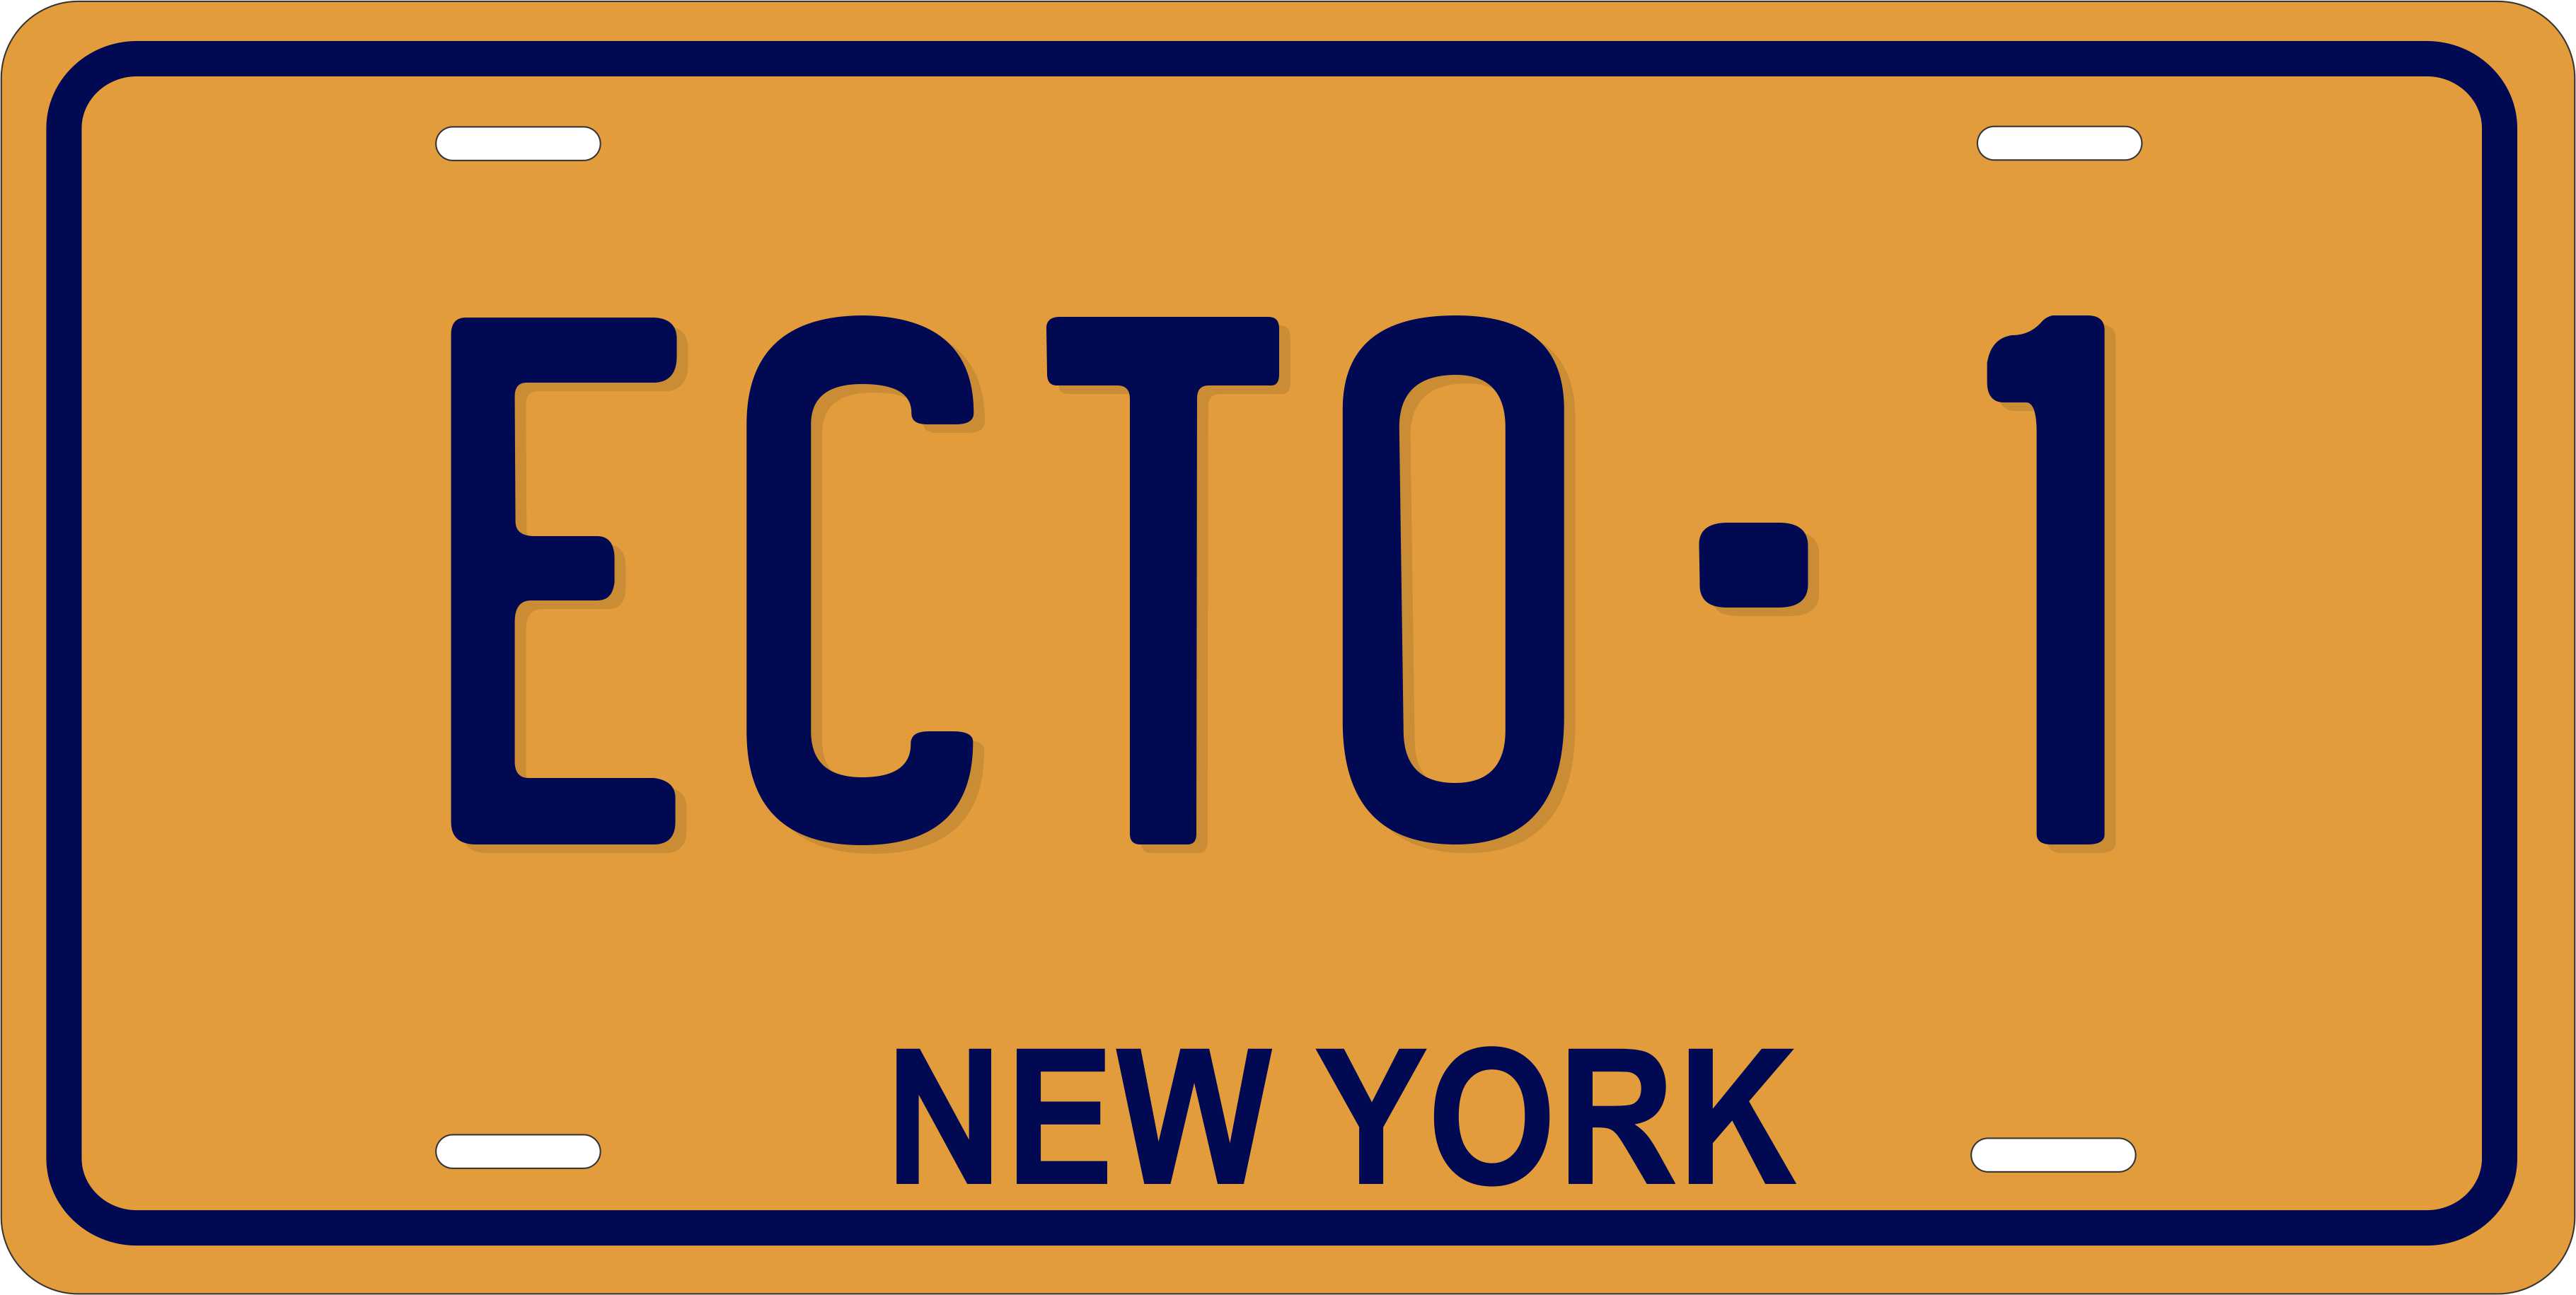 ECTO1 Tag Custom Personalize Novelty Vehicle Car Auto License Plate eBay